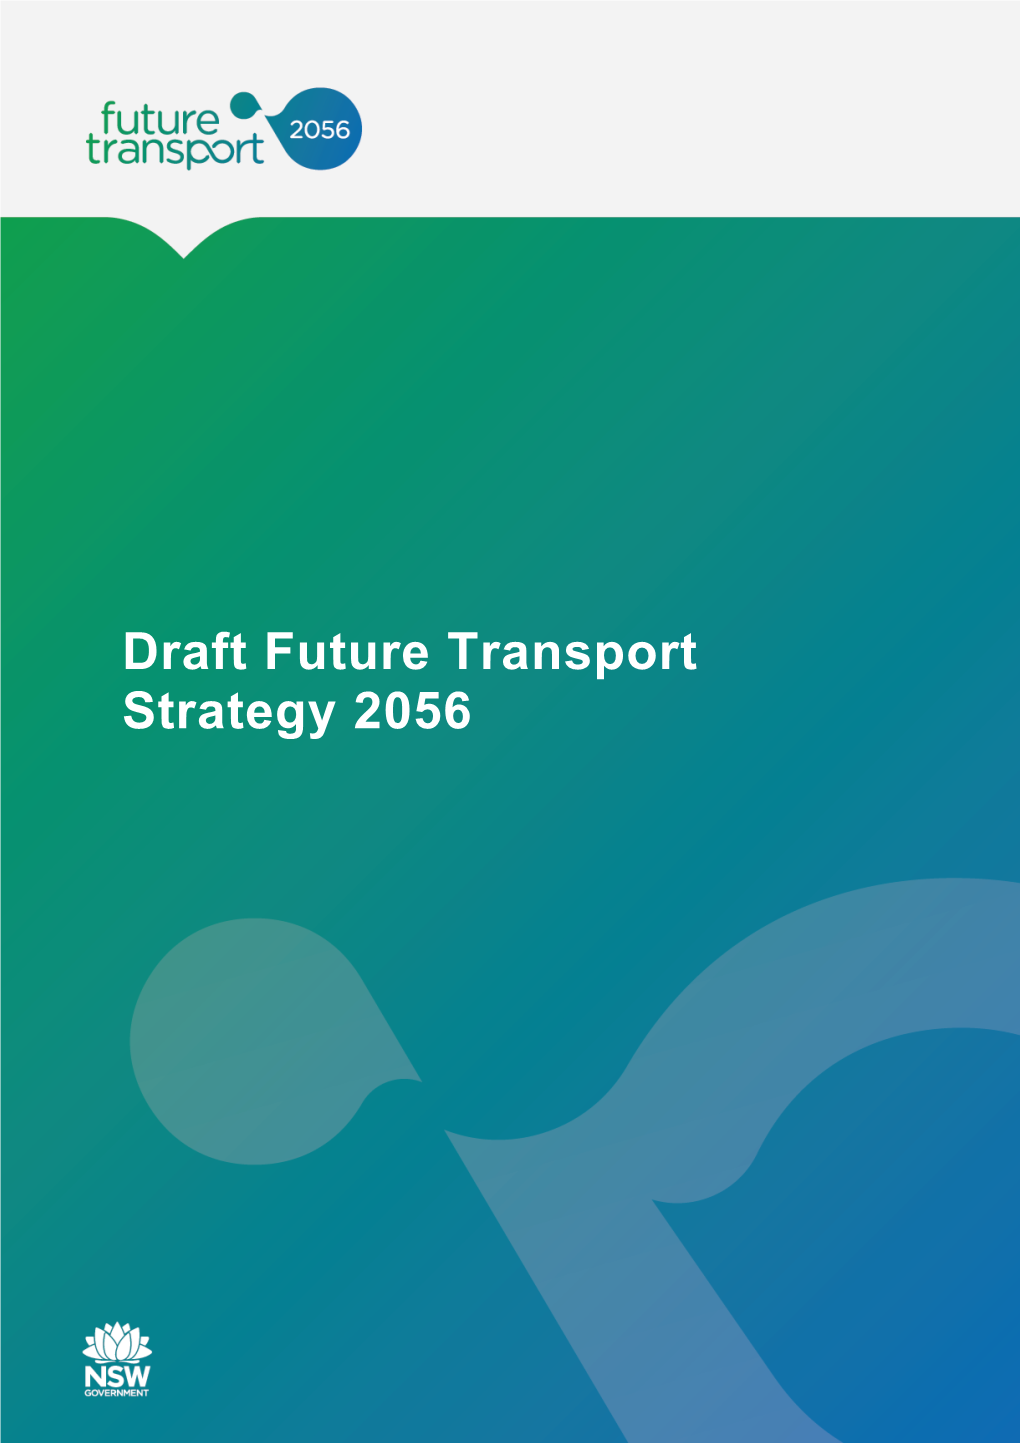 4. What Does Future Transport Mean for Regional NSW?